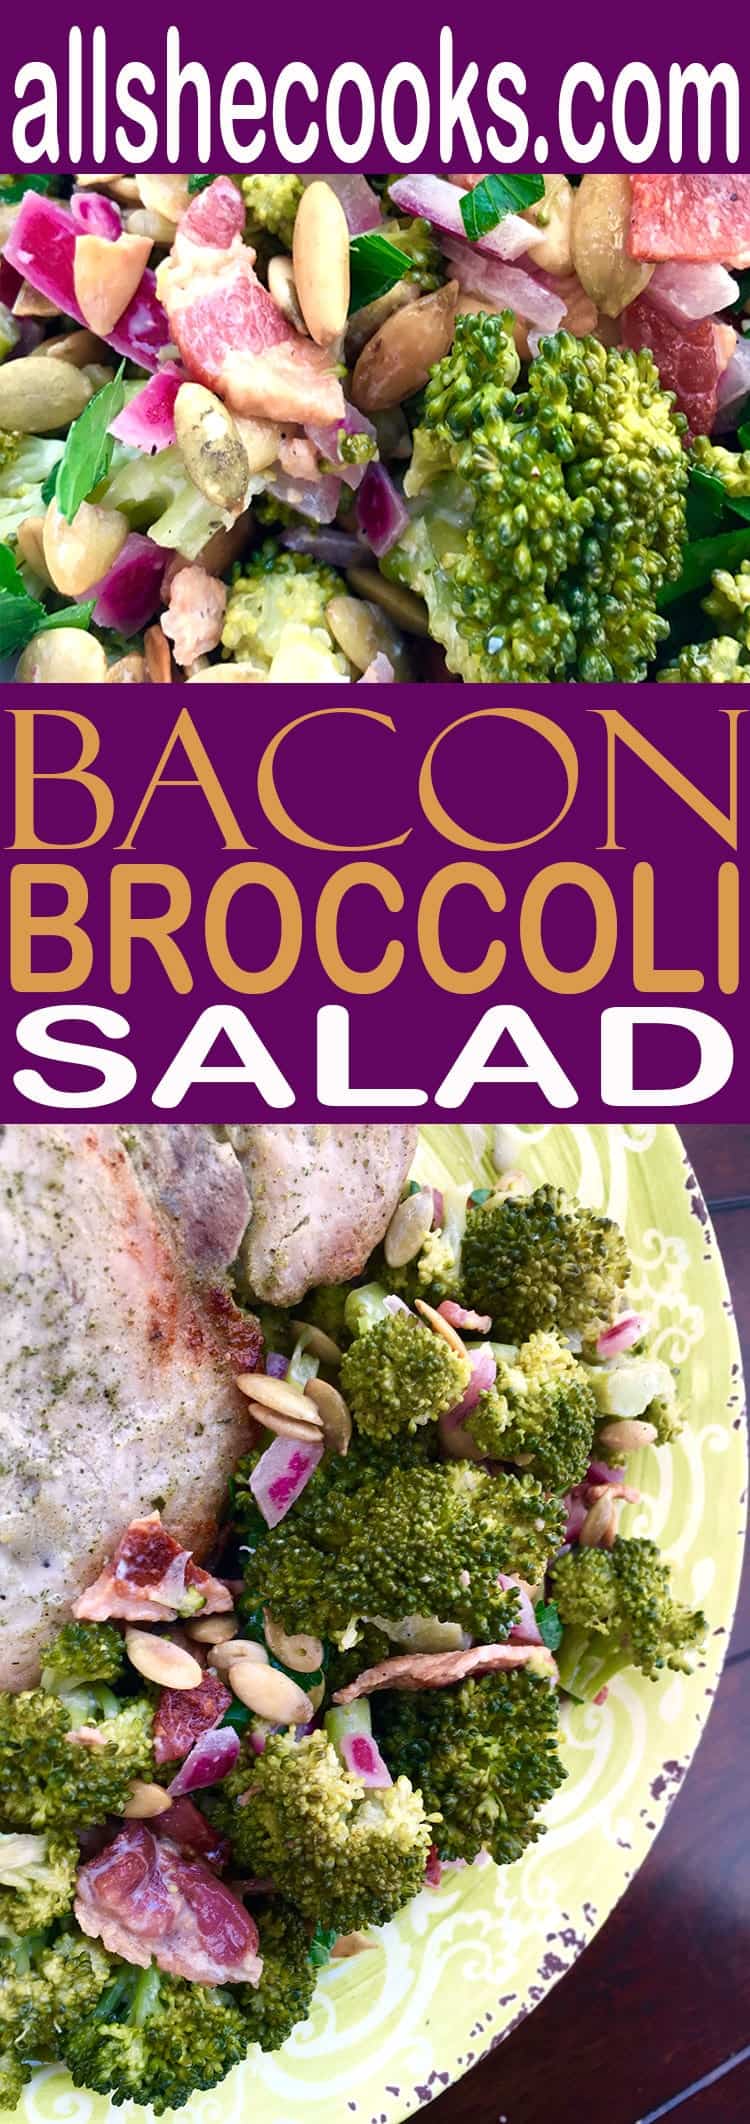 Bacon Broccoli Salad is the perfect salad when you're trying to figure out what salad to bring to the potluck this weekend. This is an easy and flavorful salad that is a crowd pleaser.